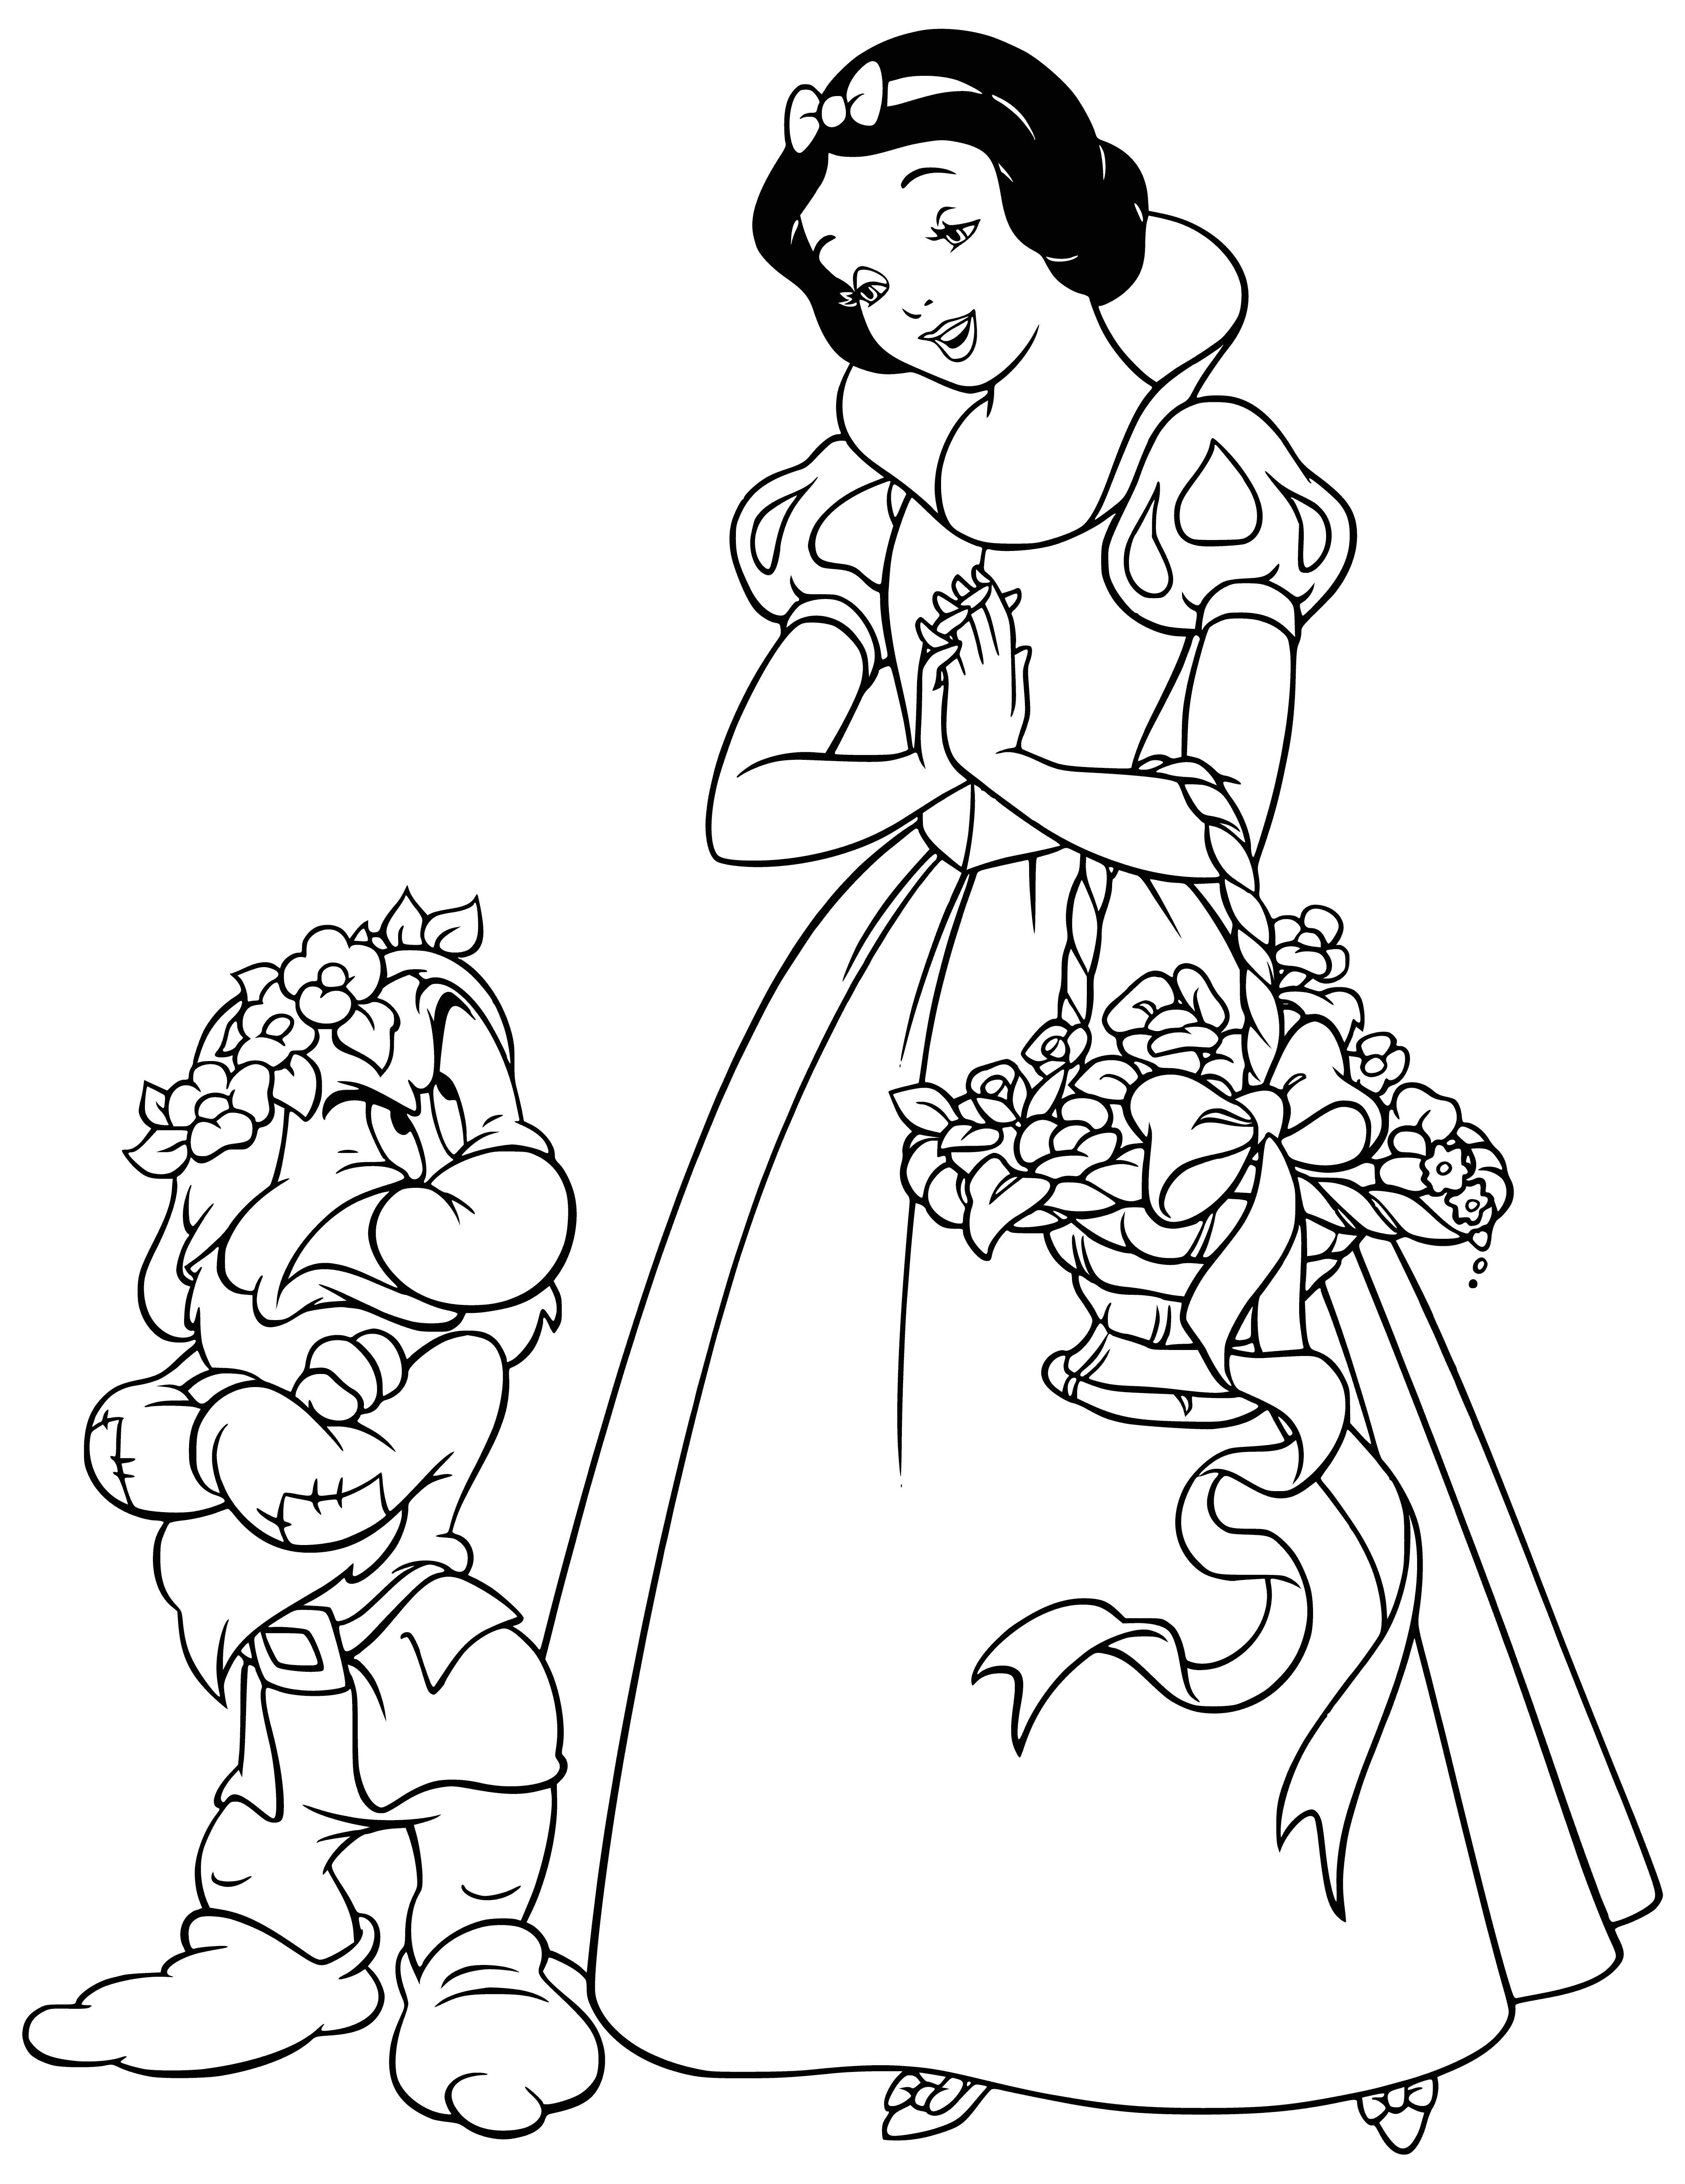 Snow White and the Gnome Grunt coloring page